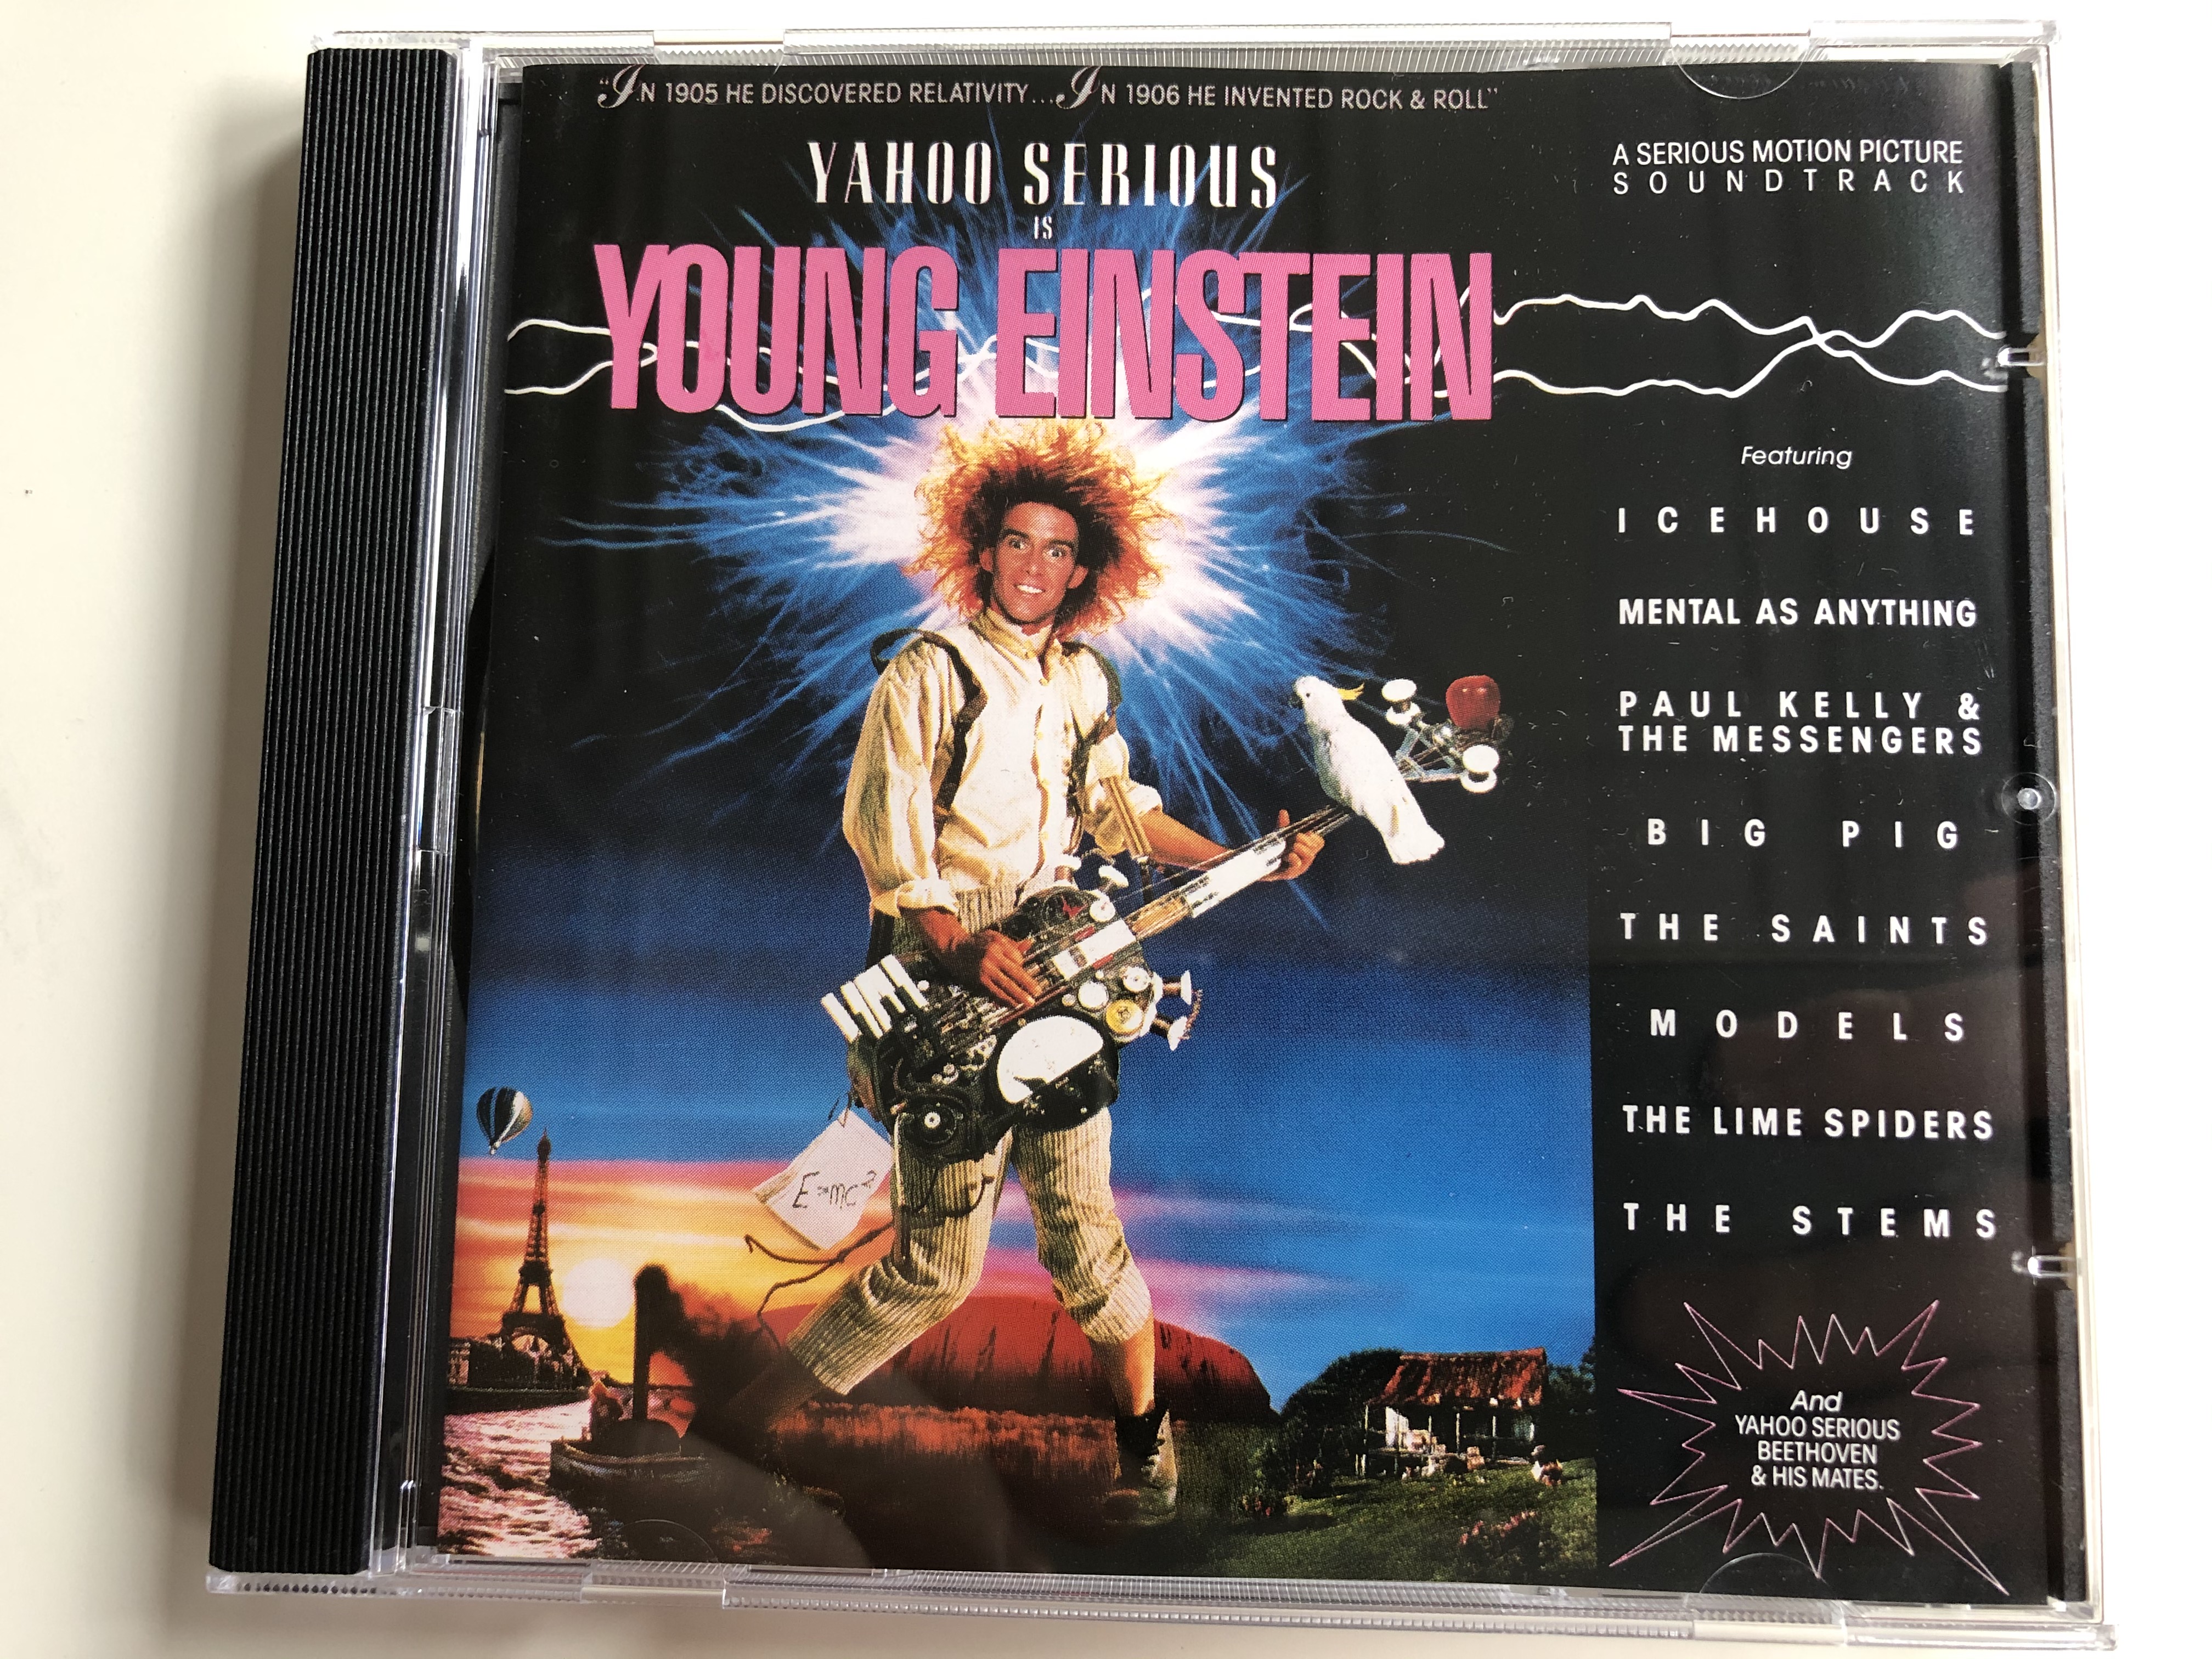 yahoo-serious-is-young-einstein-a-serious-motion-picture-soundtrack-featuring-icehouse-mental-as-anything-paul-kelly-and-the-messengers-big-pig-the-saints-models-the-lime-spiders-the-s-1-.jpg